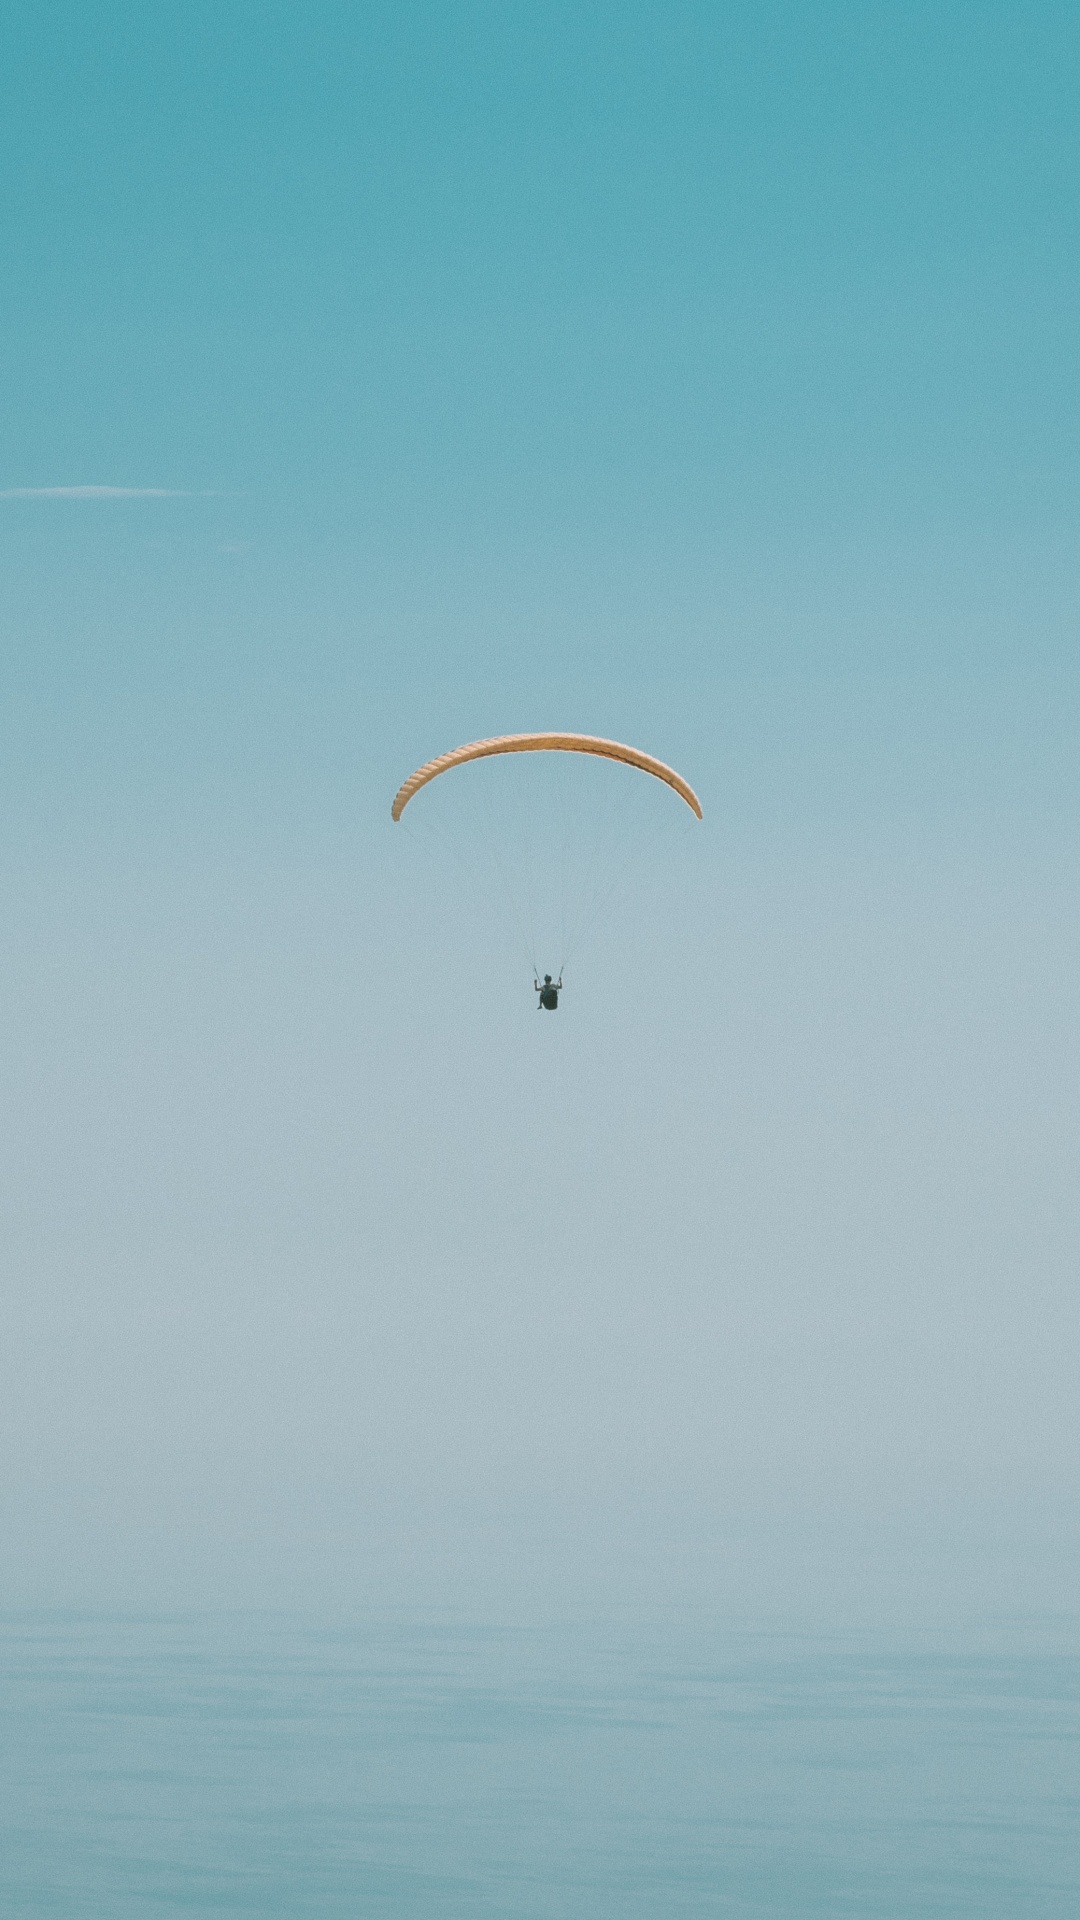 Person in Parachute Under Blue Sky During Daytime. Wallpaper in 1080x1920 Resolution